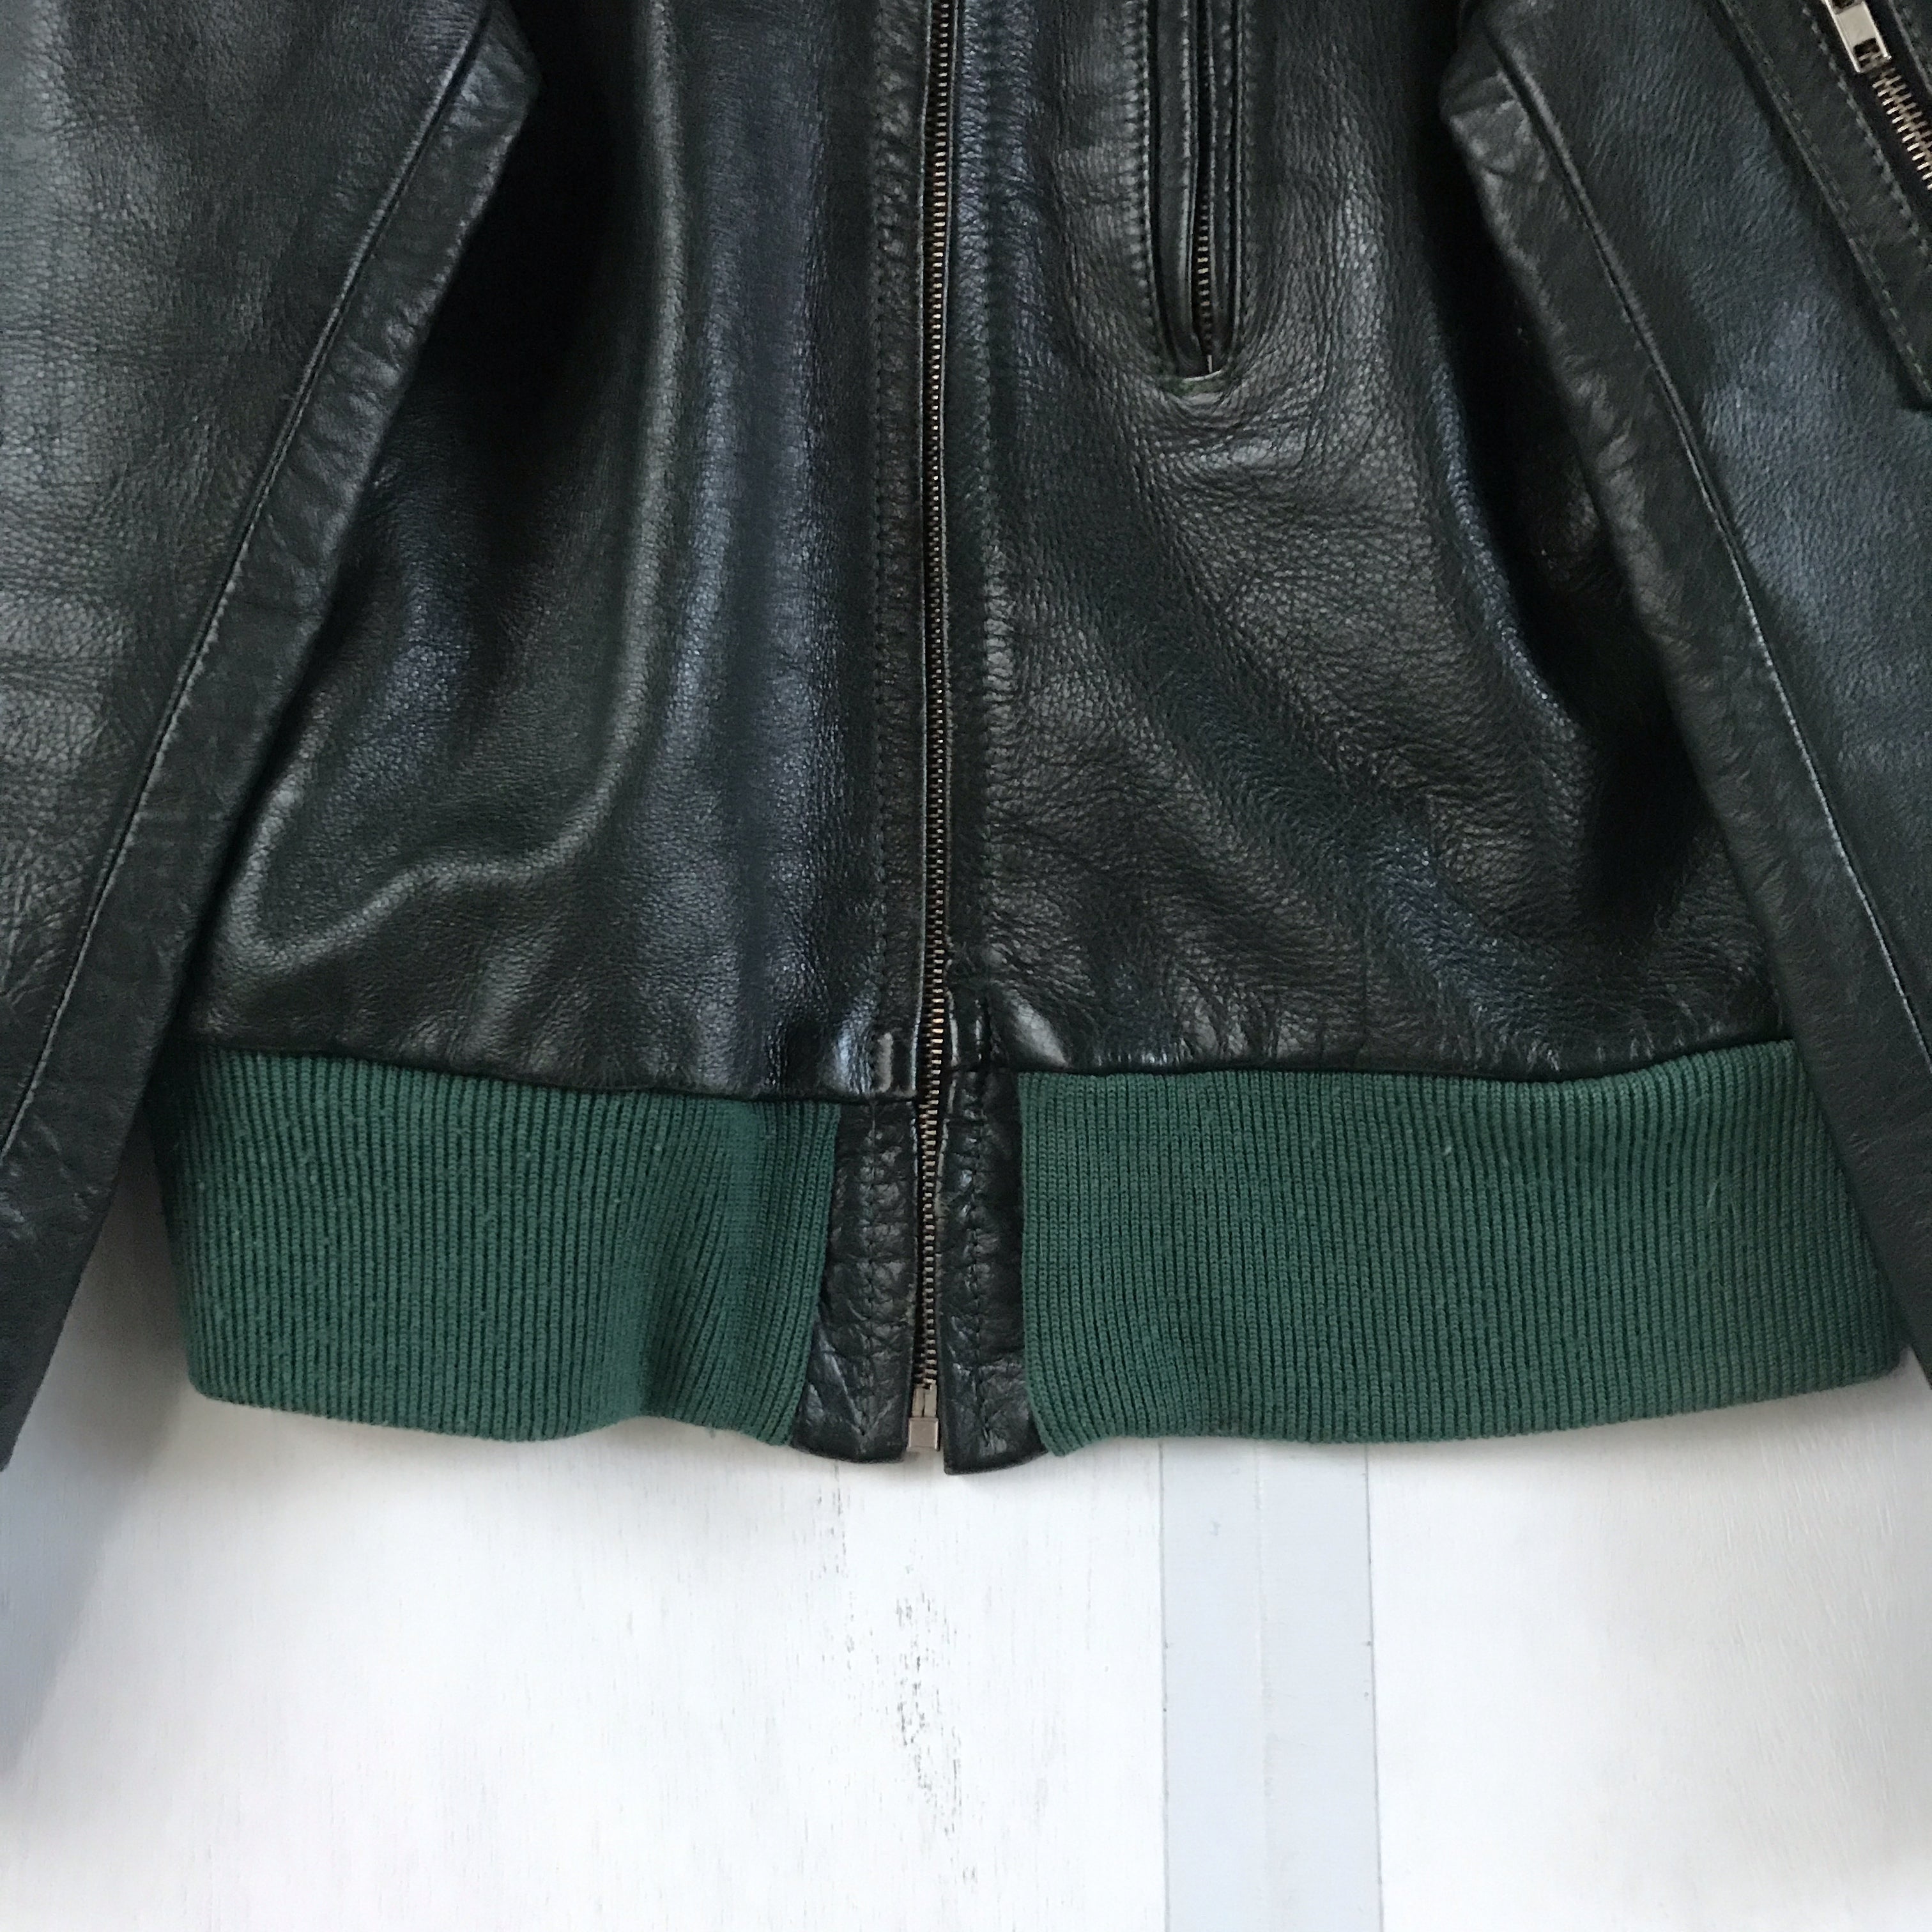 [ ONLY ONE ! ] National Safety Council of Australia　LEATHER JACKET / MARS LEATHERS